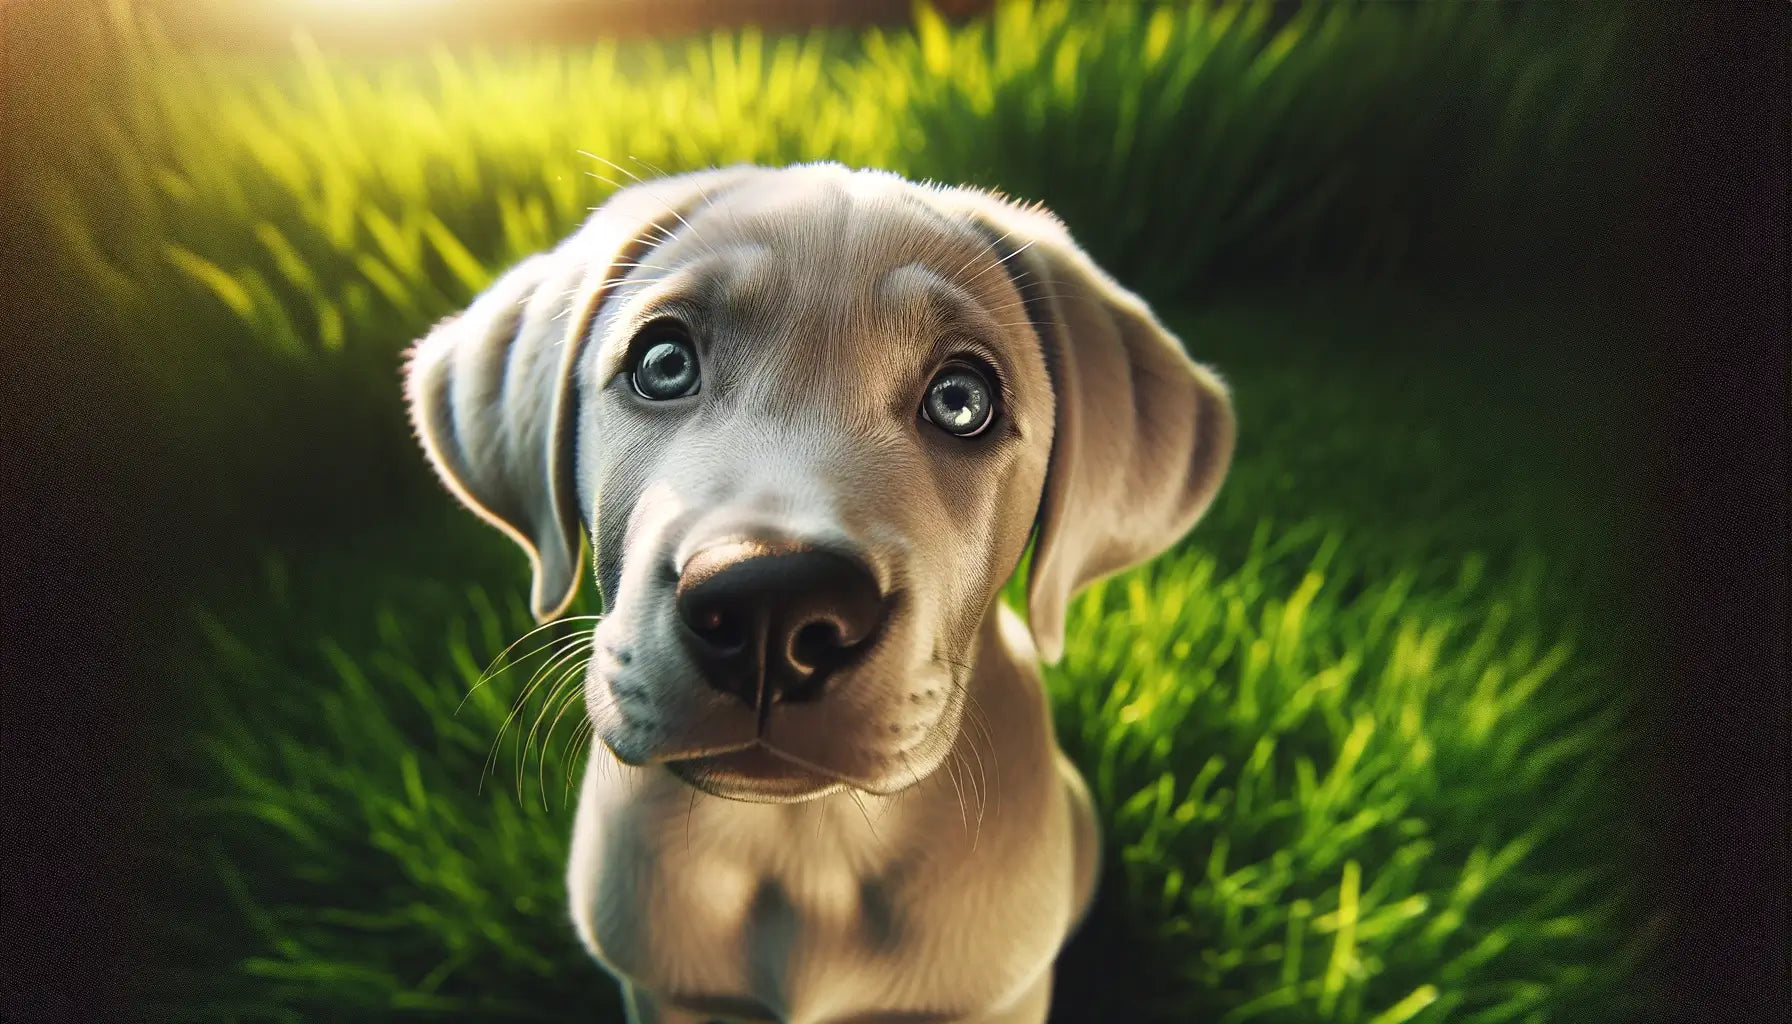 A close-up of a Silver Lab puppy's face, with the puppy looking directly at the camera, set against a backdrop of vibrant green grass.